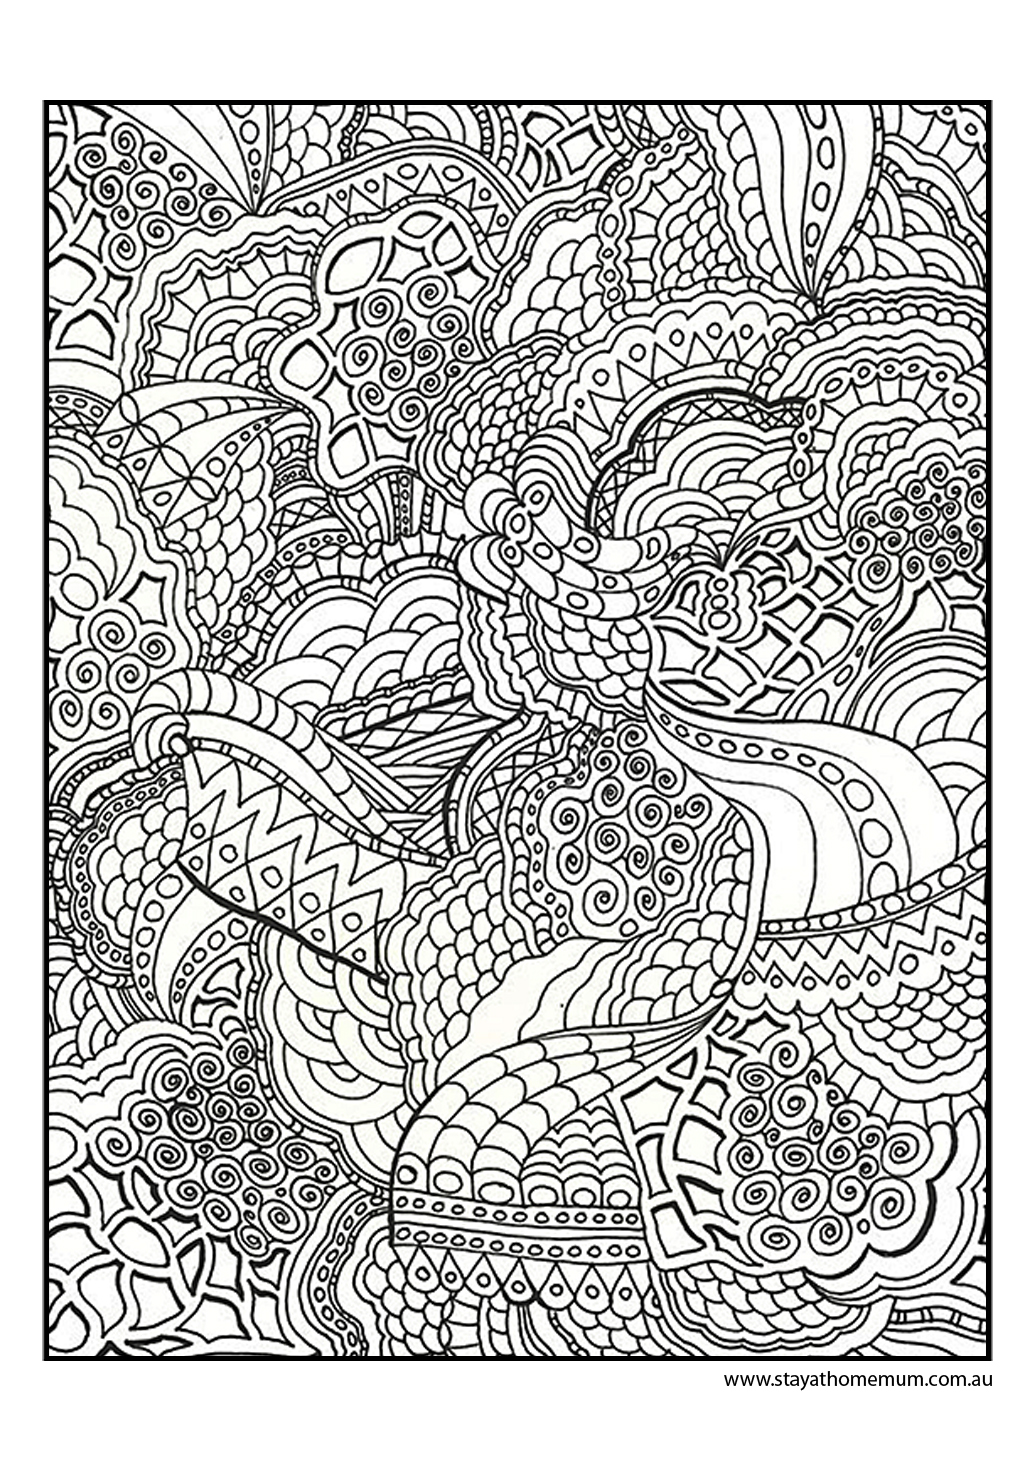 Colouring Pages For Adults Free : Free Printable Zentangle Coloring Pages for Adults - Which of these 18 free coloring pages for adults is your favorite?